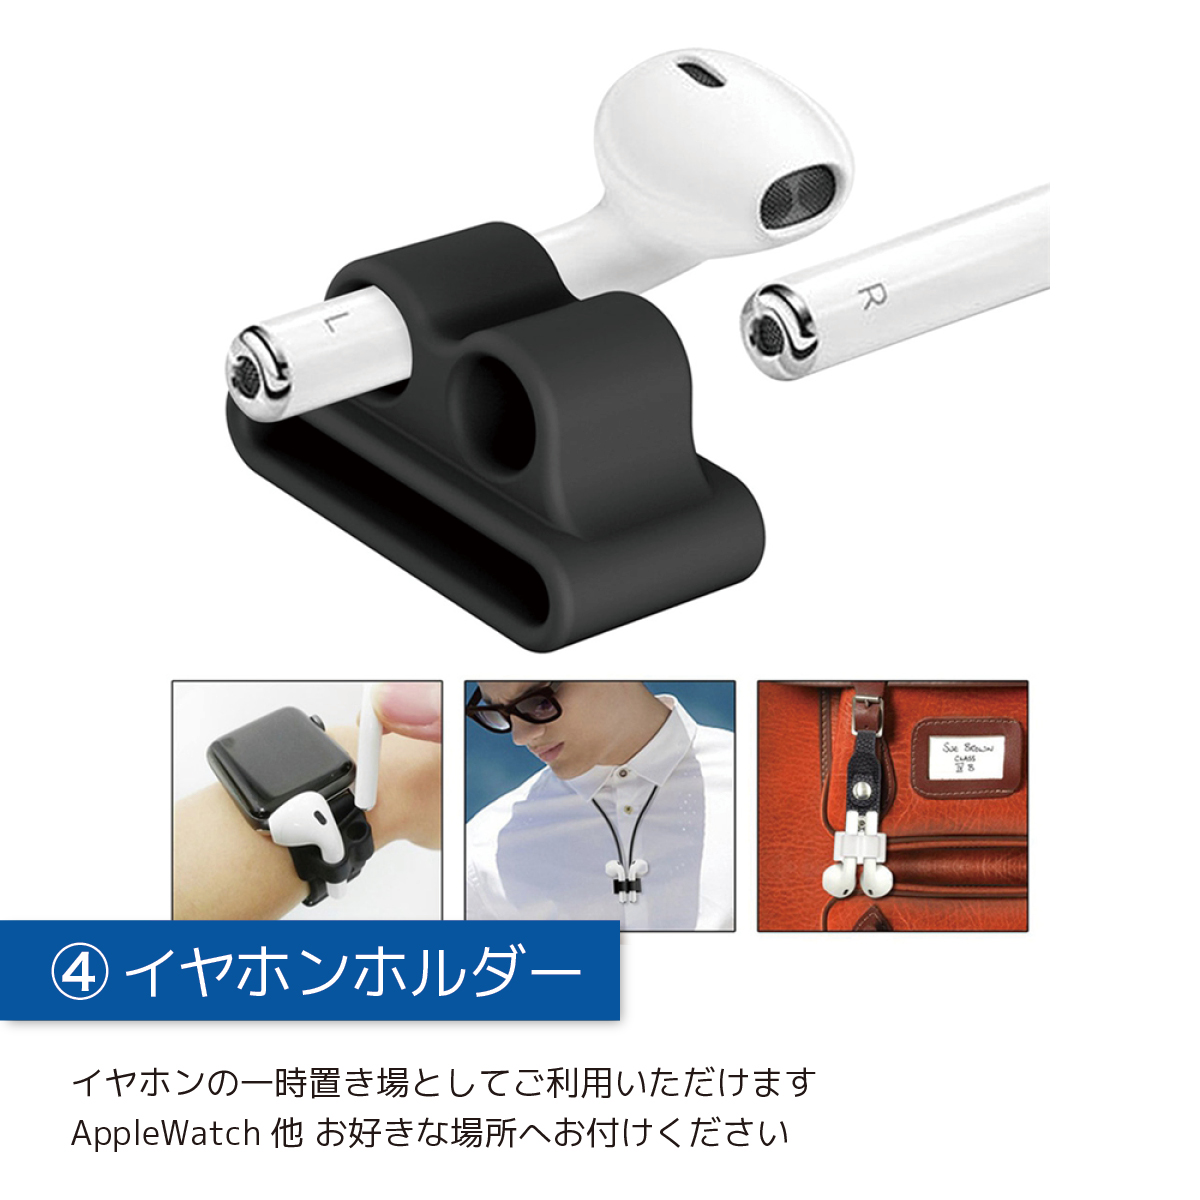 AirPods Pro 第2世代 ケース カバー 6点セット 青 黒 白 AirPods Pro2 ケース おしゃれ エアーポッズ プロ ケース  MagSafe Qiワイヤレス充電 第3世代